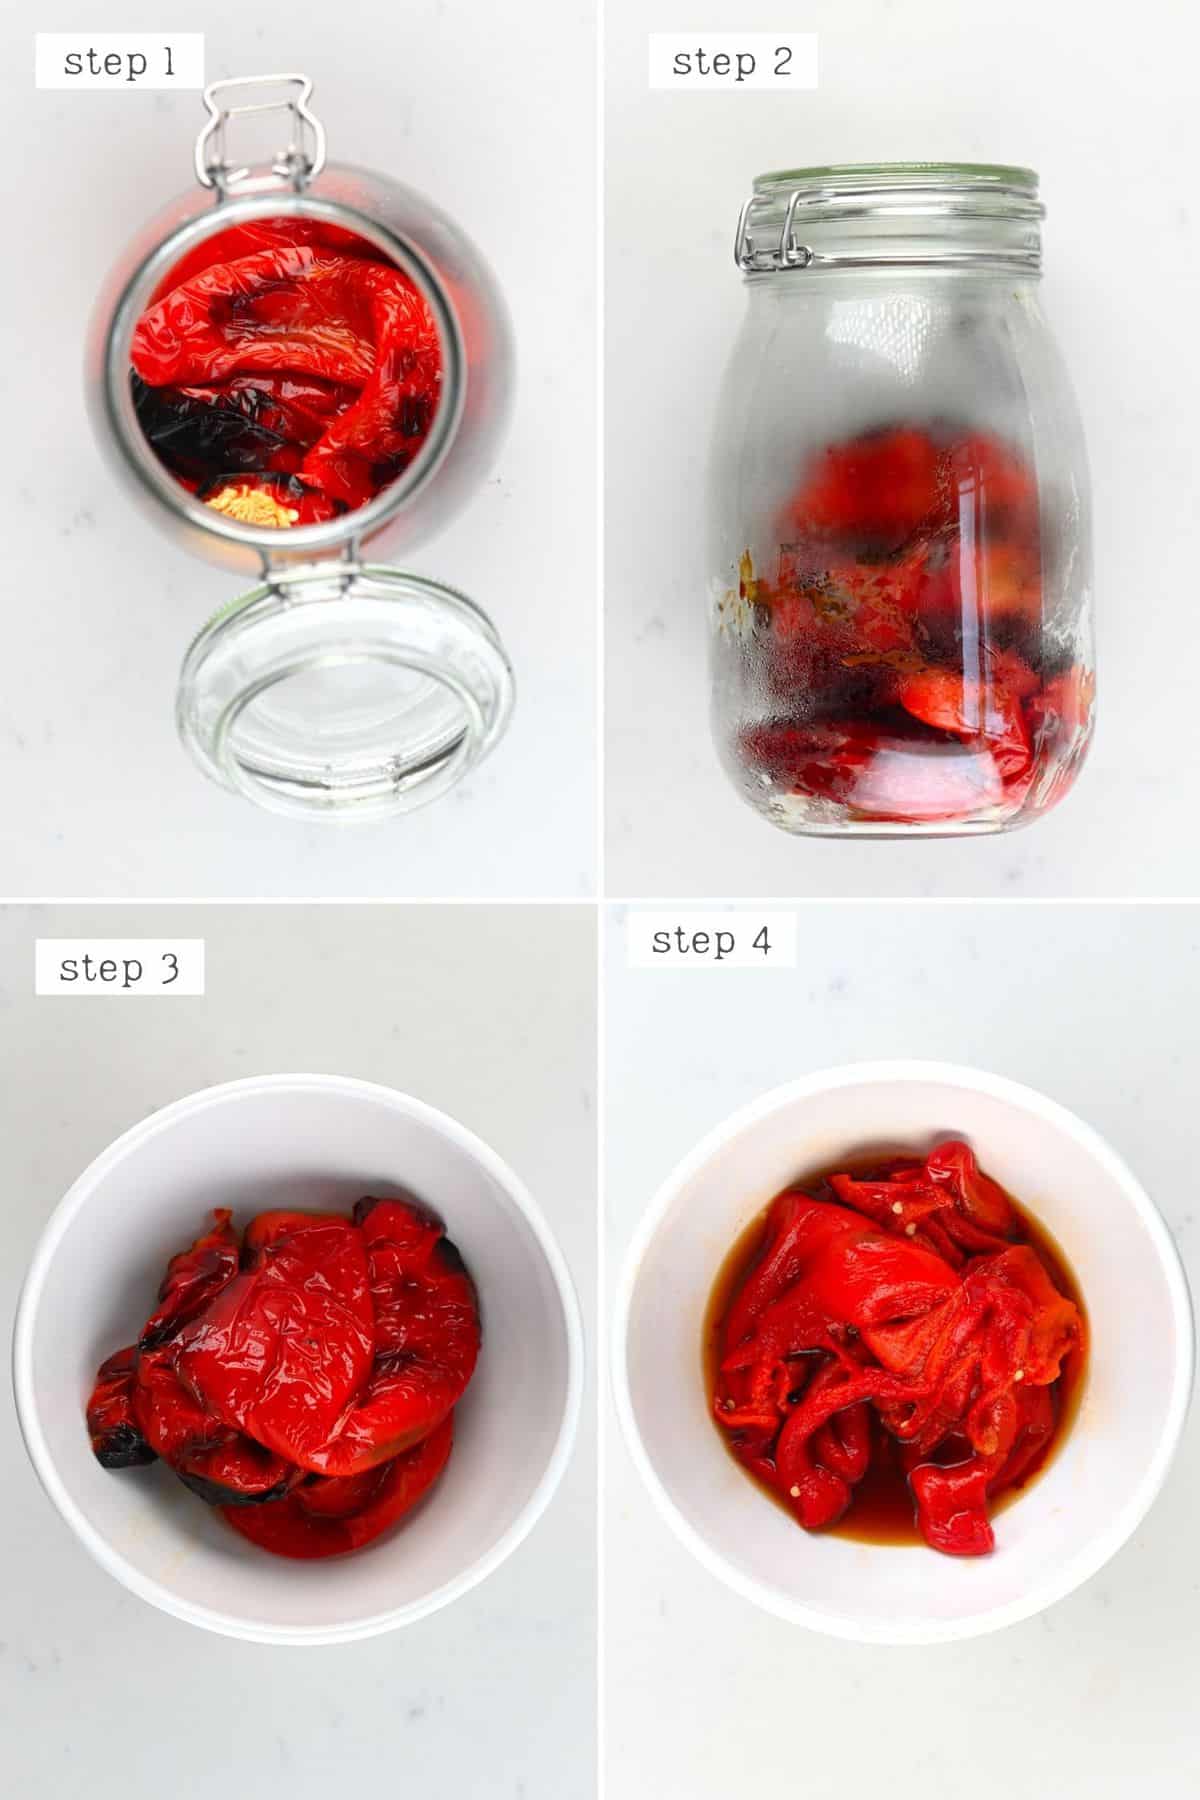 Steps for steaming and peeling peppers